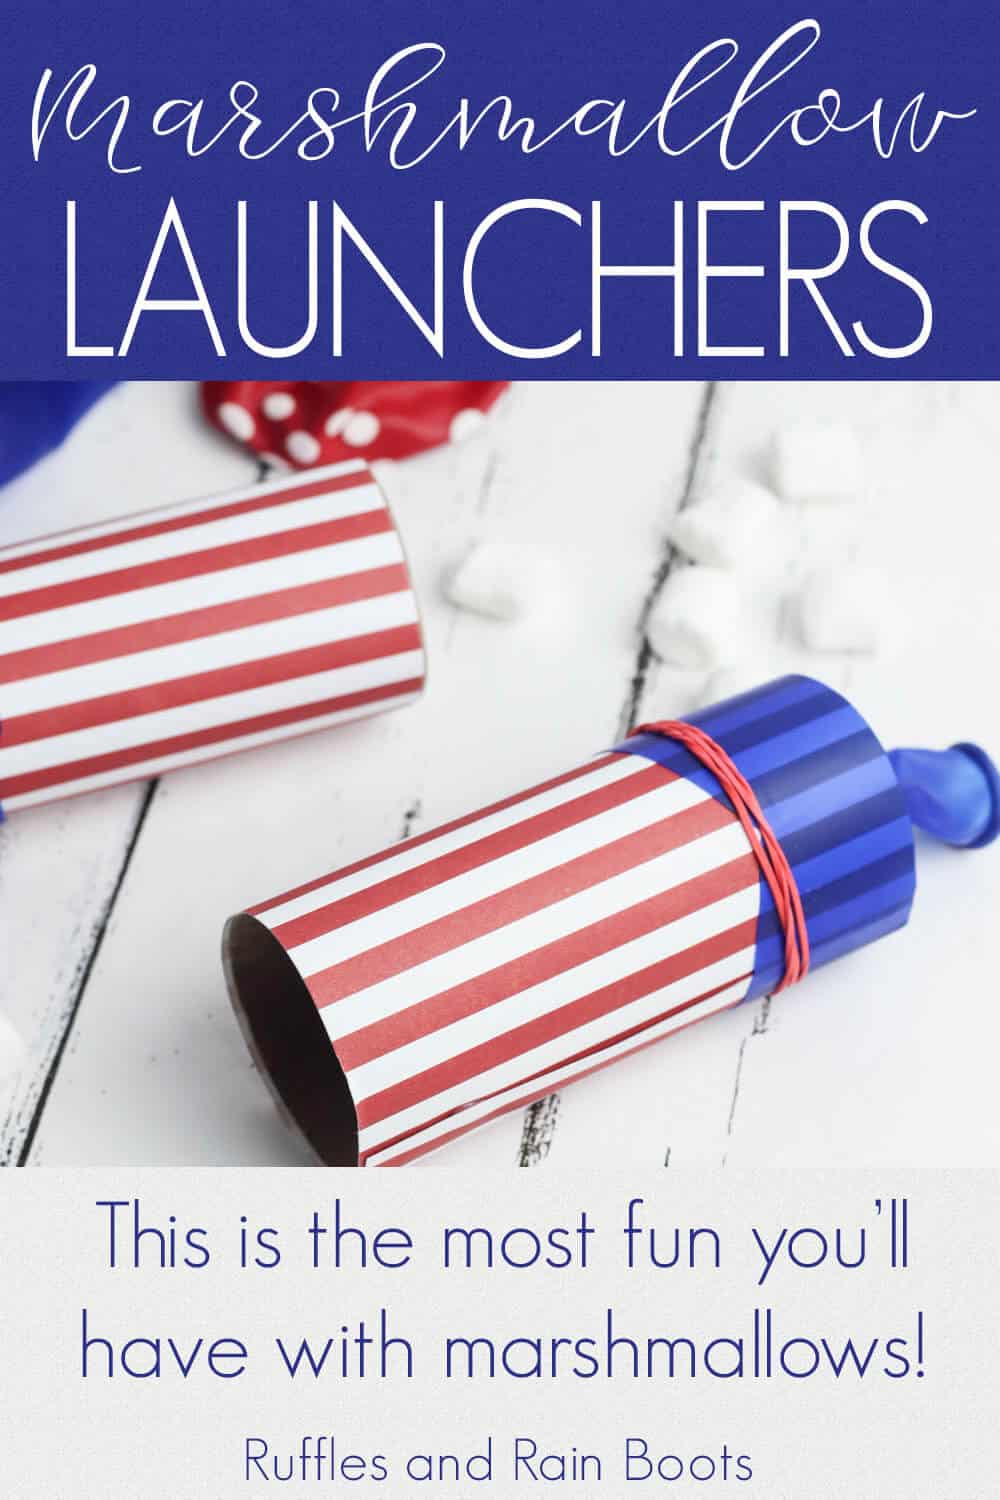 two marshmallow shooters launchers on a wooden board decorated for july 4th party with text which reads marshmallow launchers this is the most fun you'll have with marshmallows